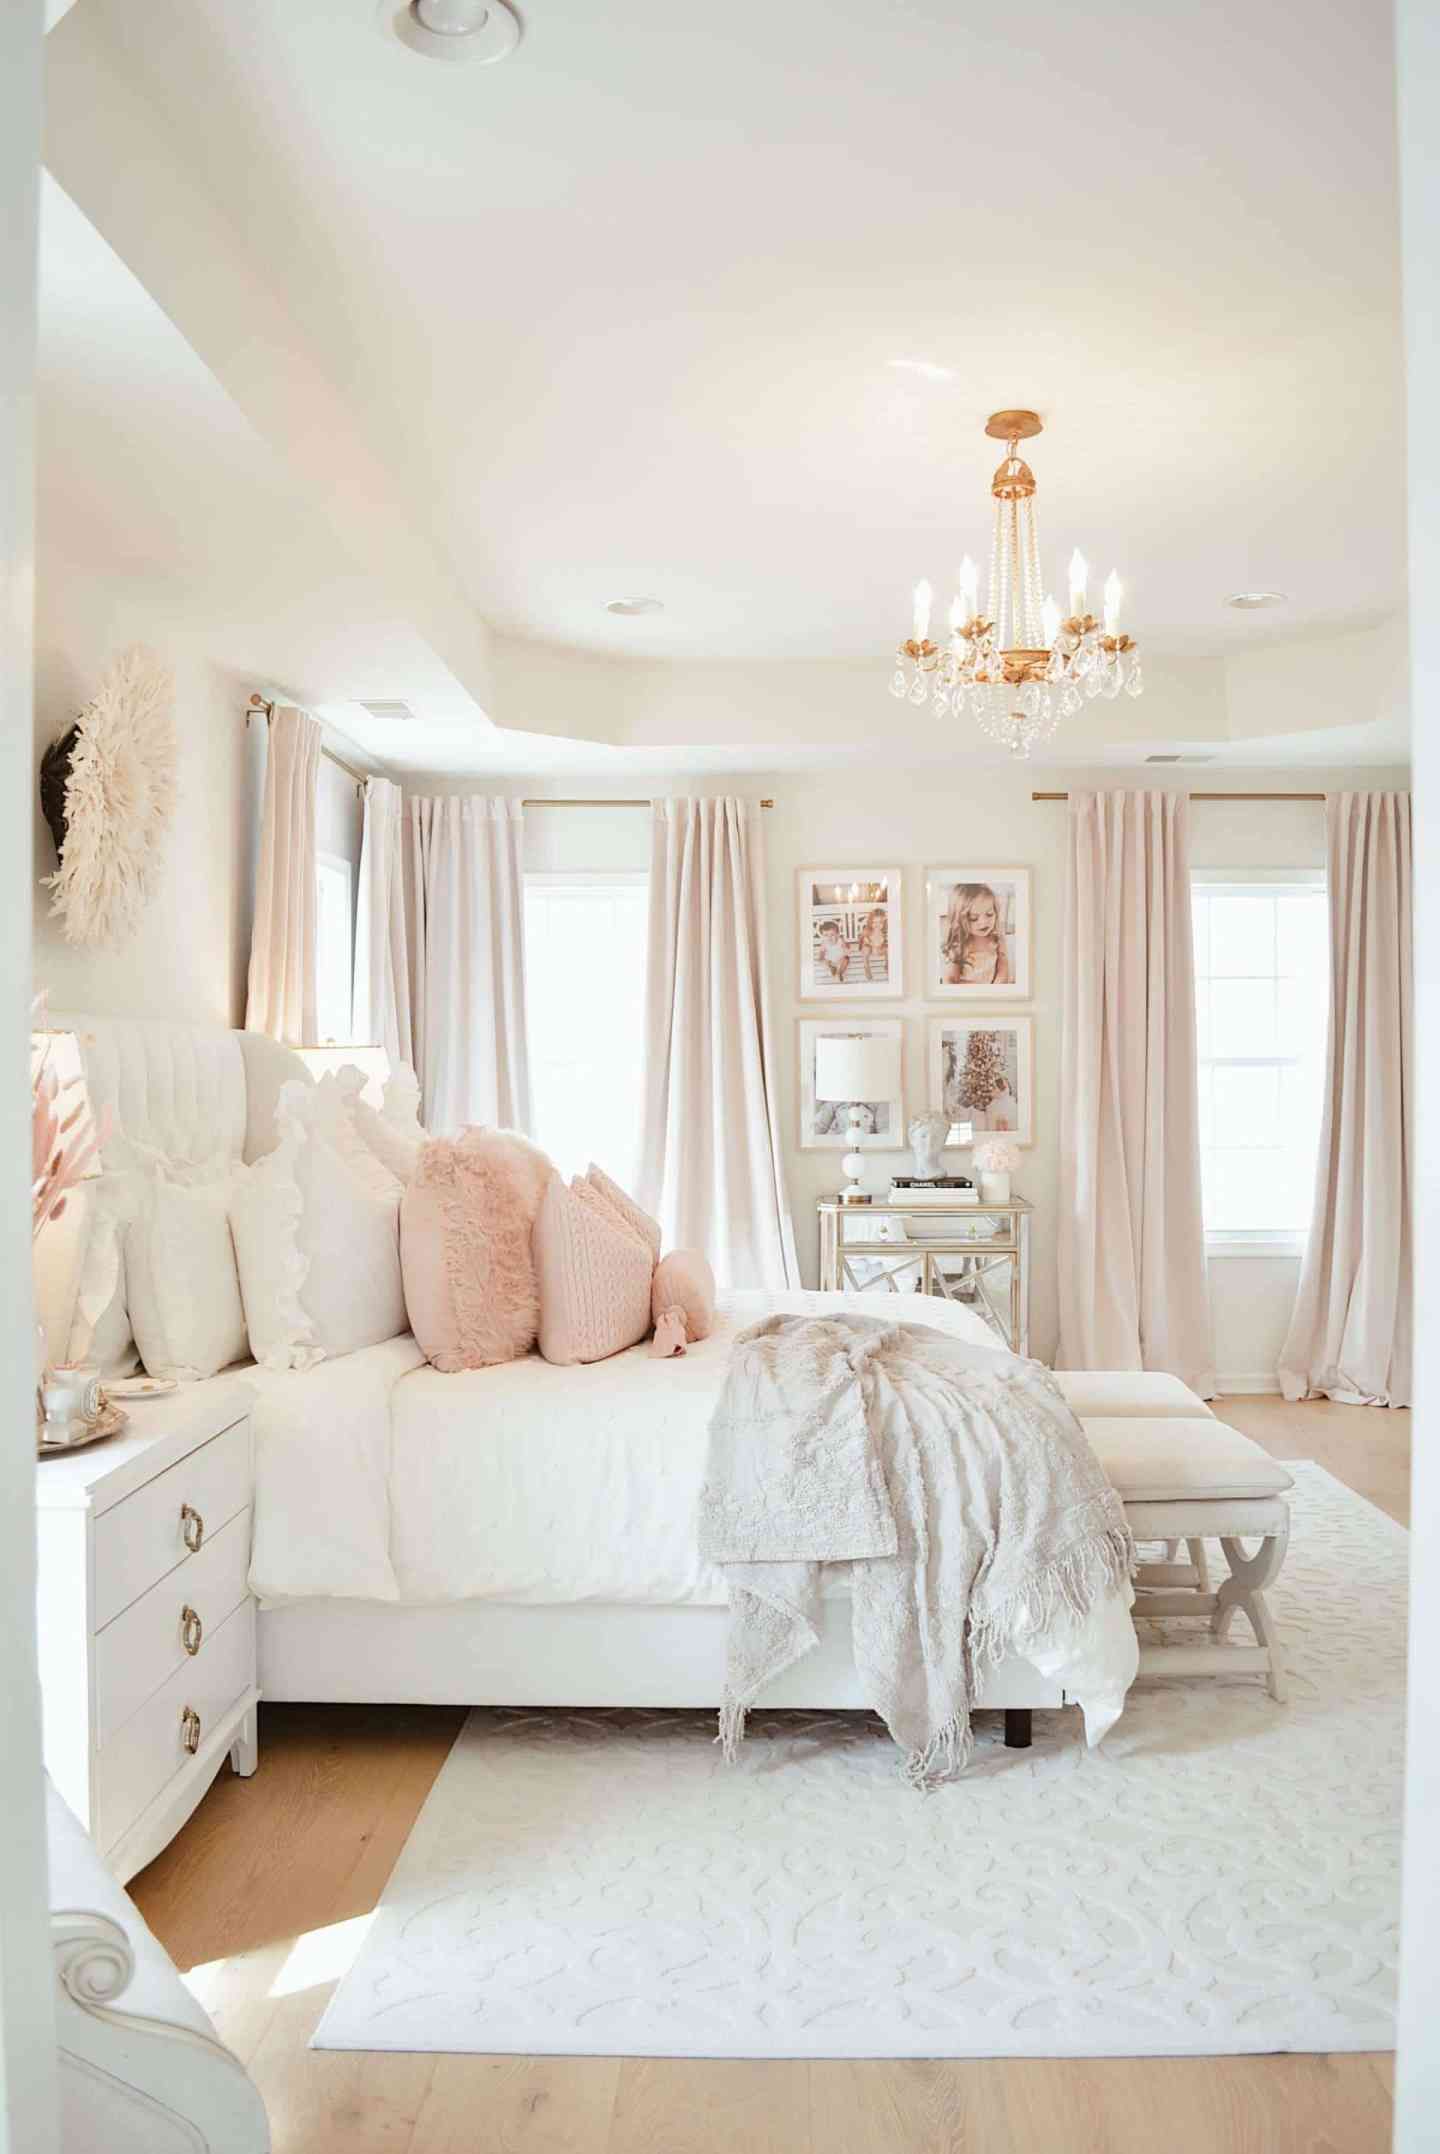 Cozy Bedroom In Pink And White